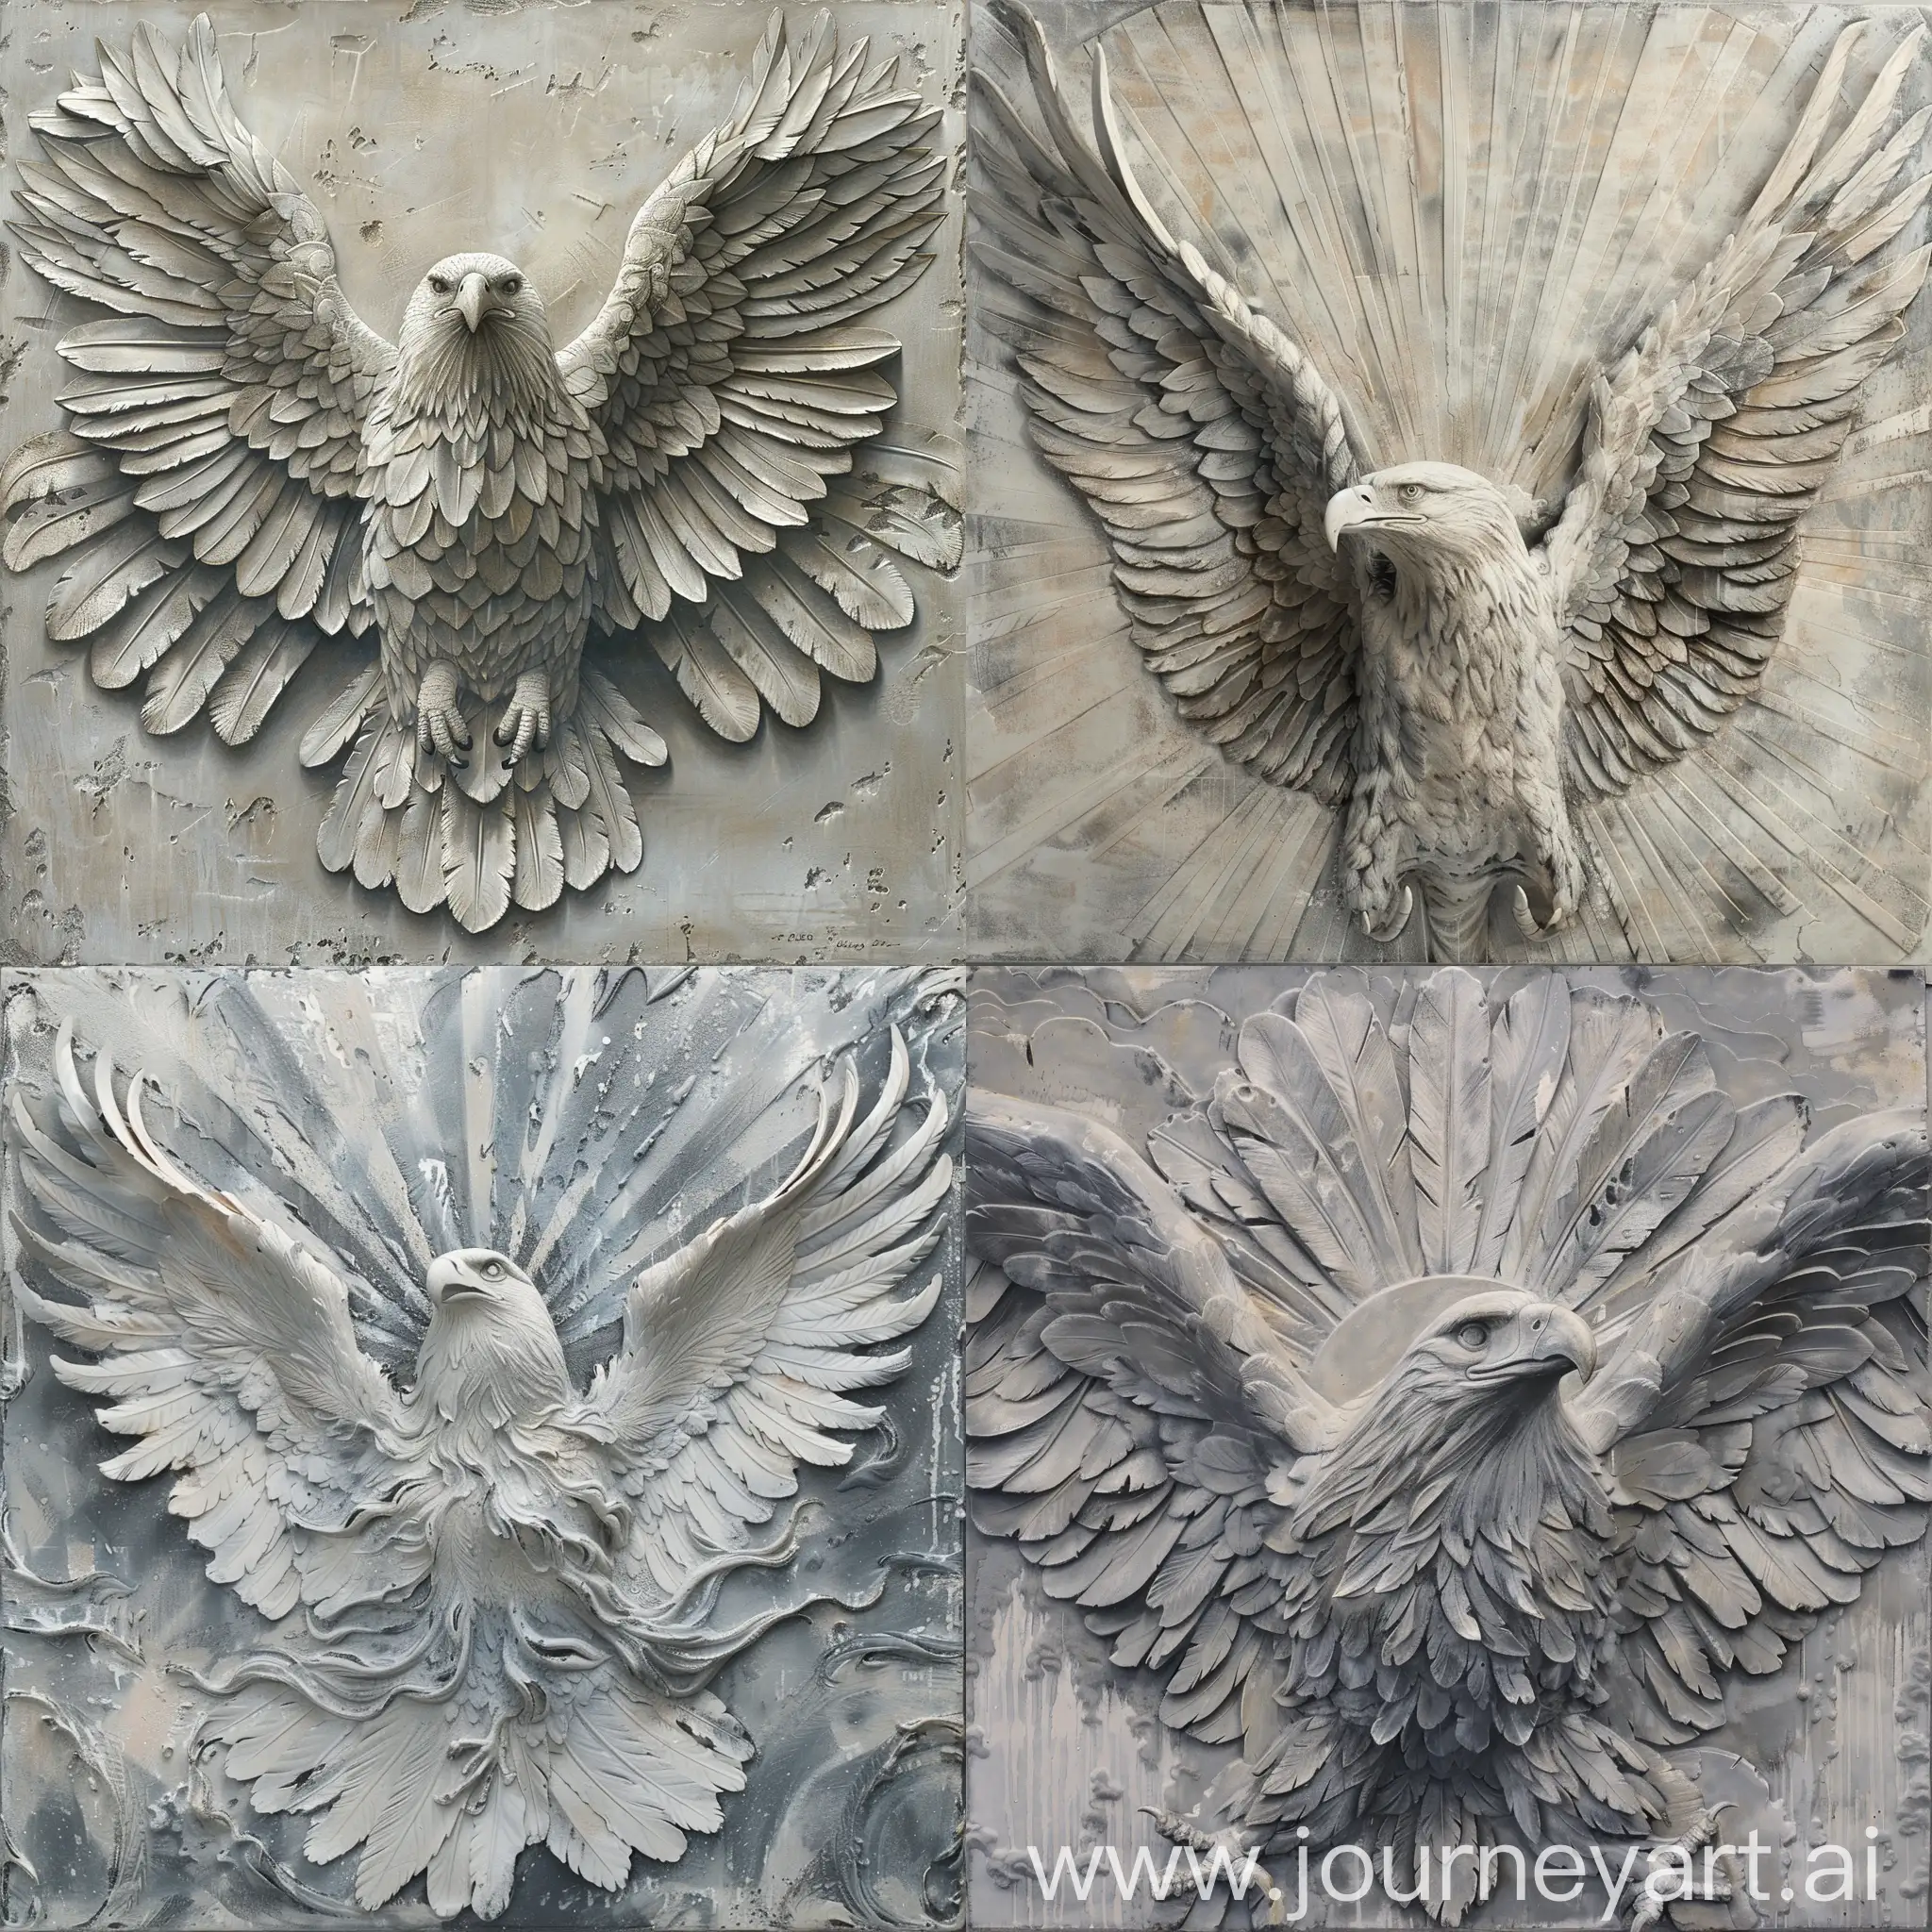 Dynamic-Eagle-Sculpture-with-Spread-Wings